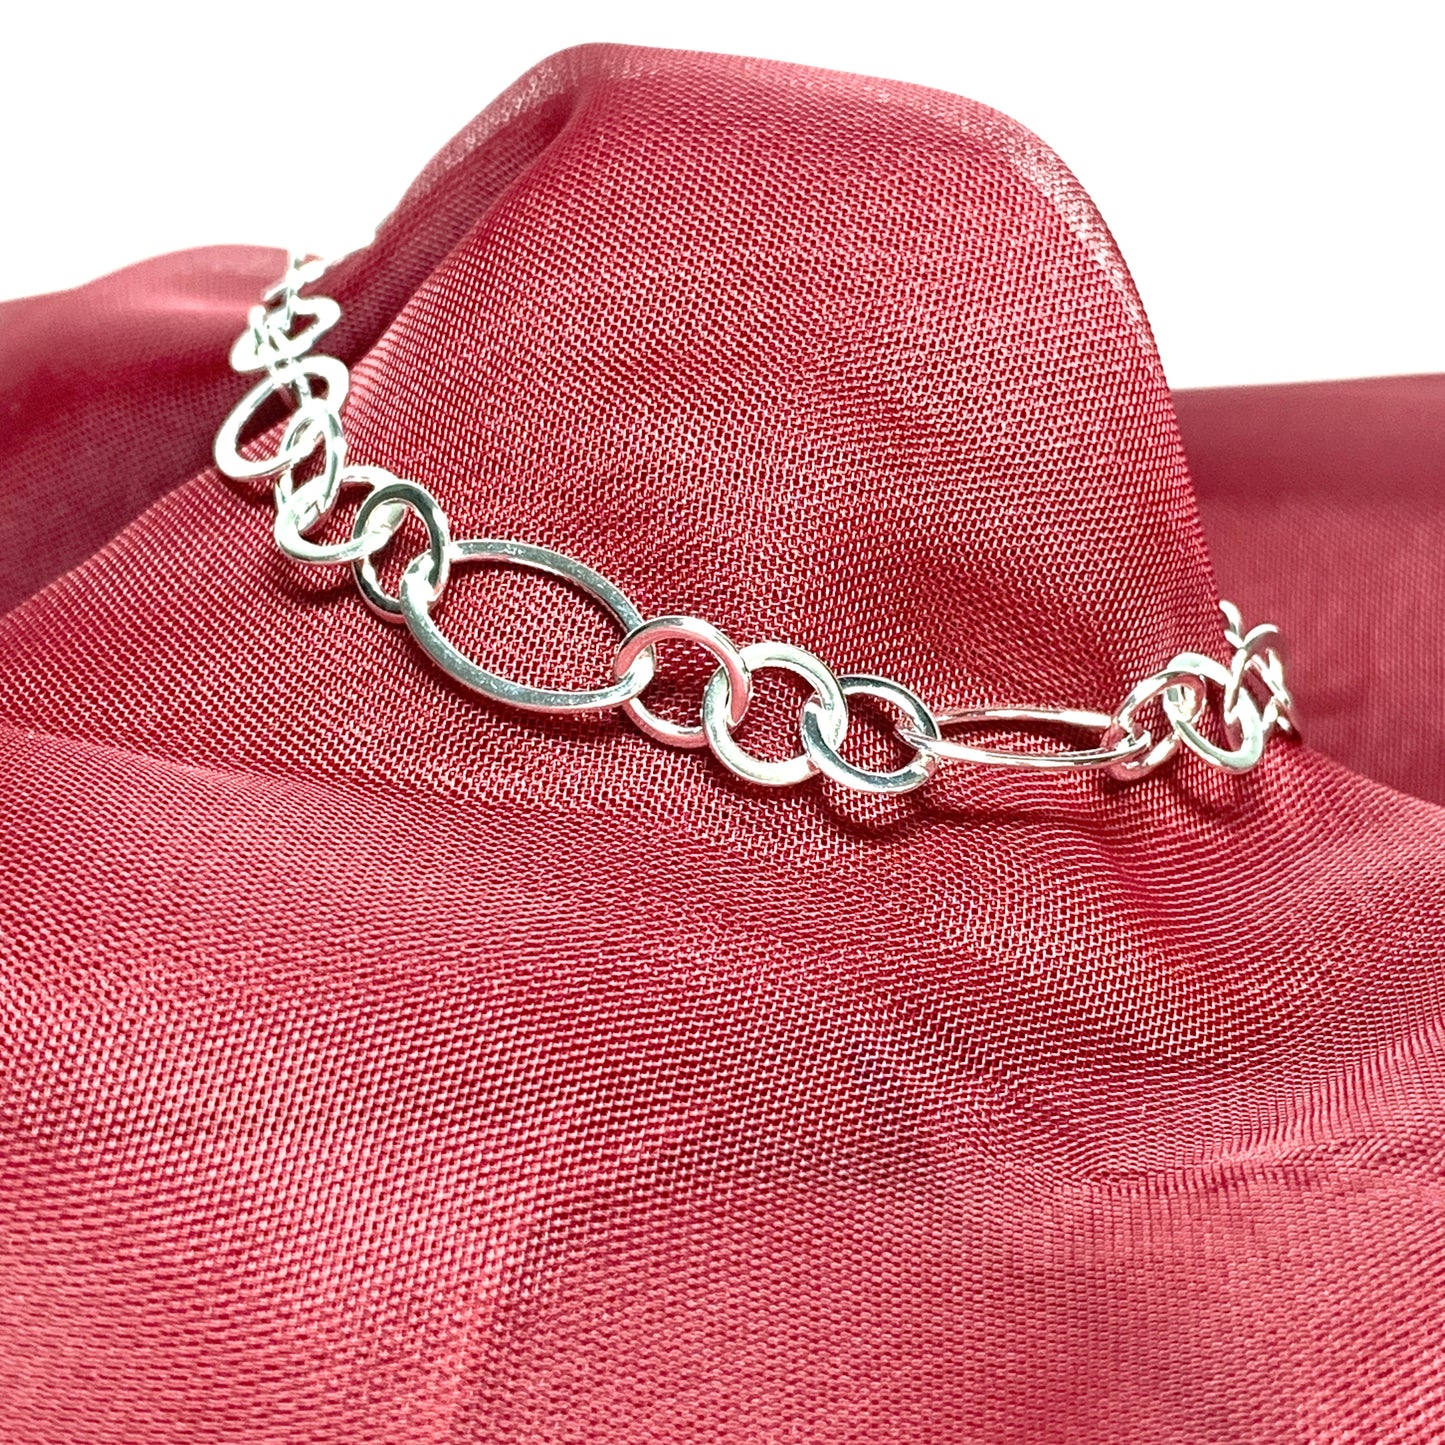 Solid silver bracelet fancy with an open link oval and round